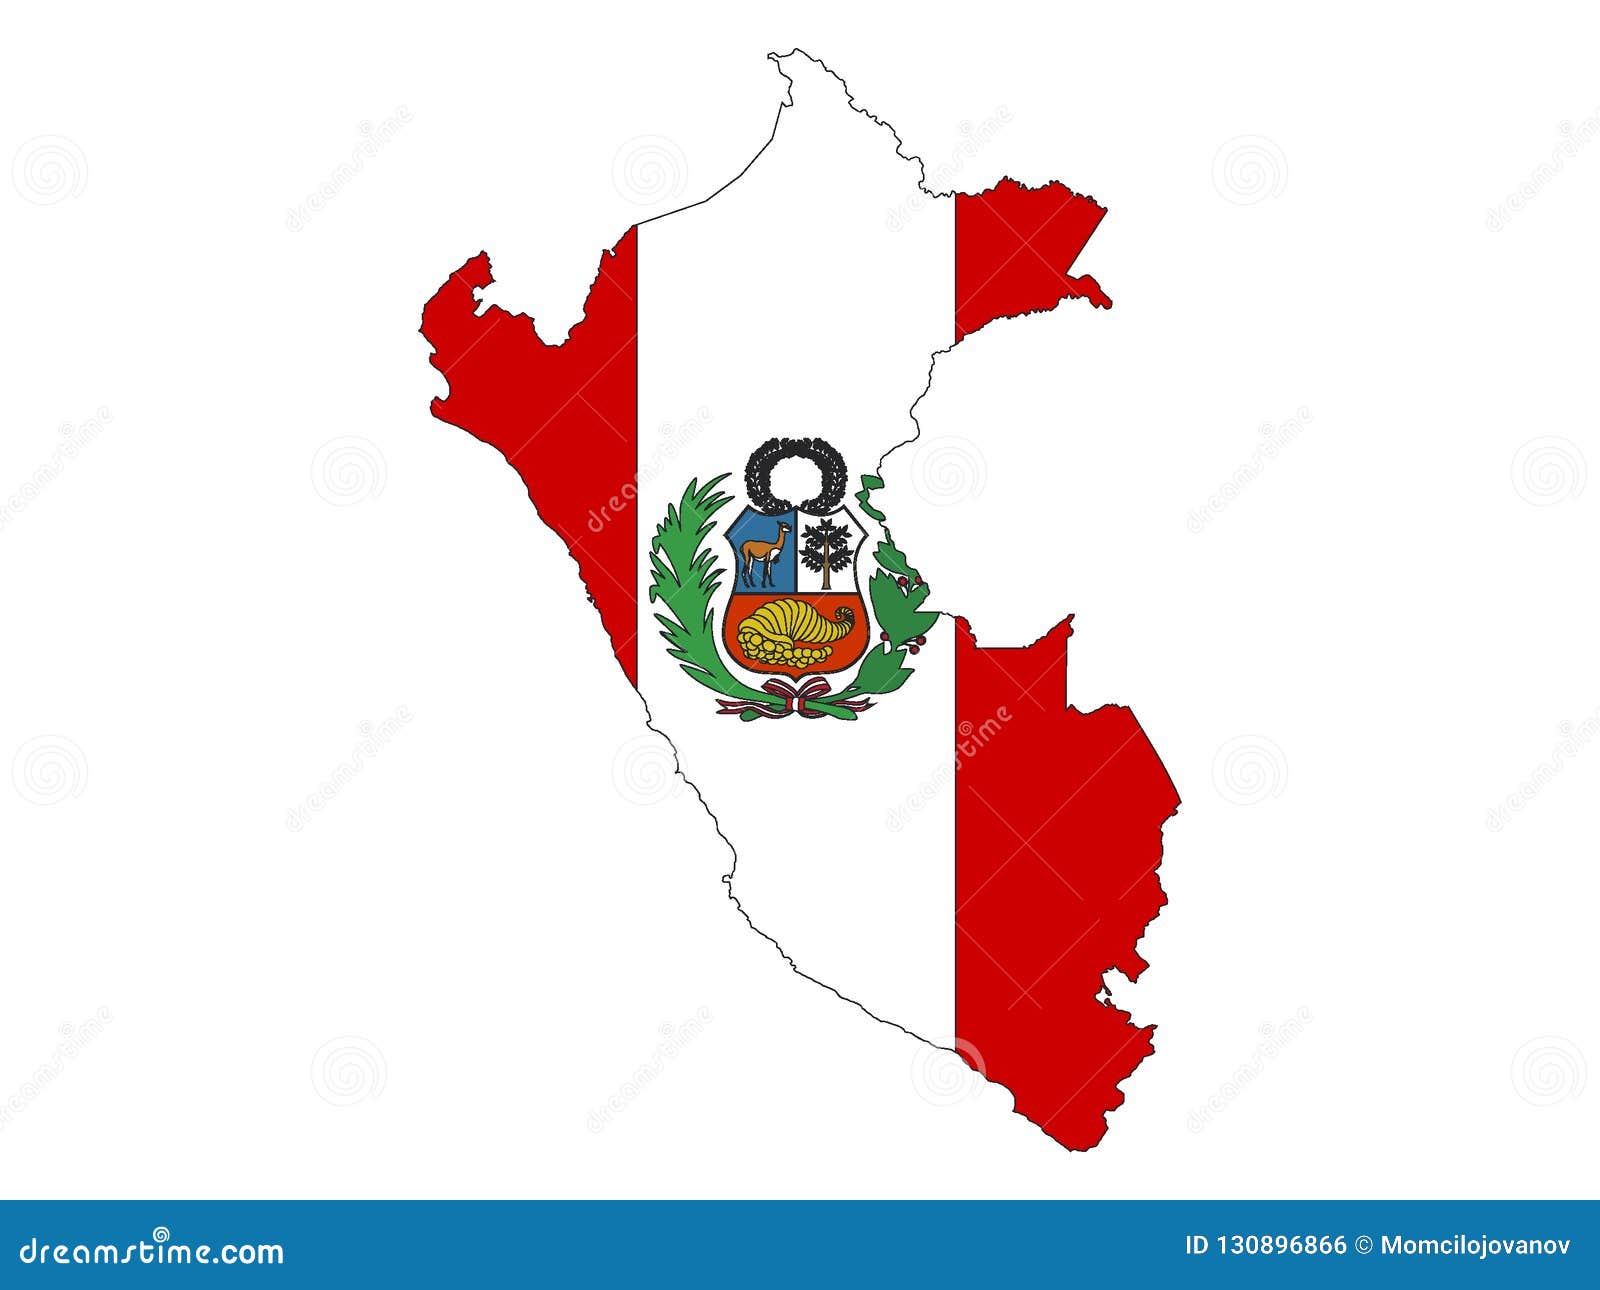 Peru Map and Flag Combined stock vector. Illustration of peru - 130896866